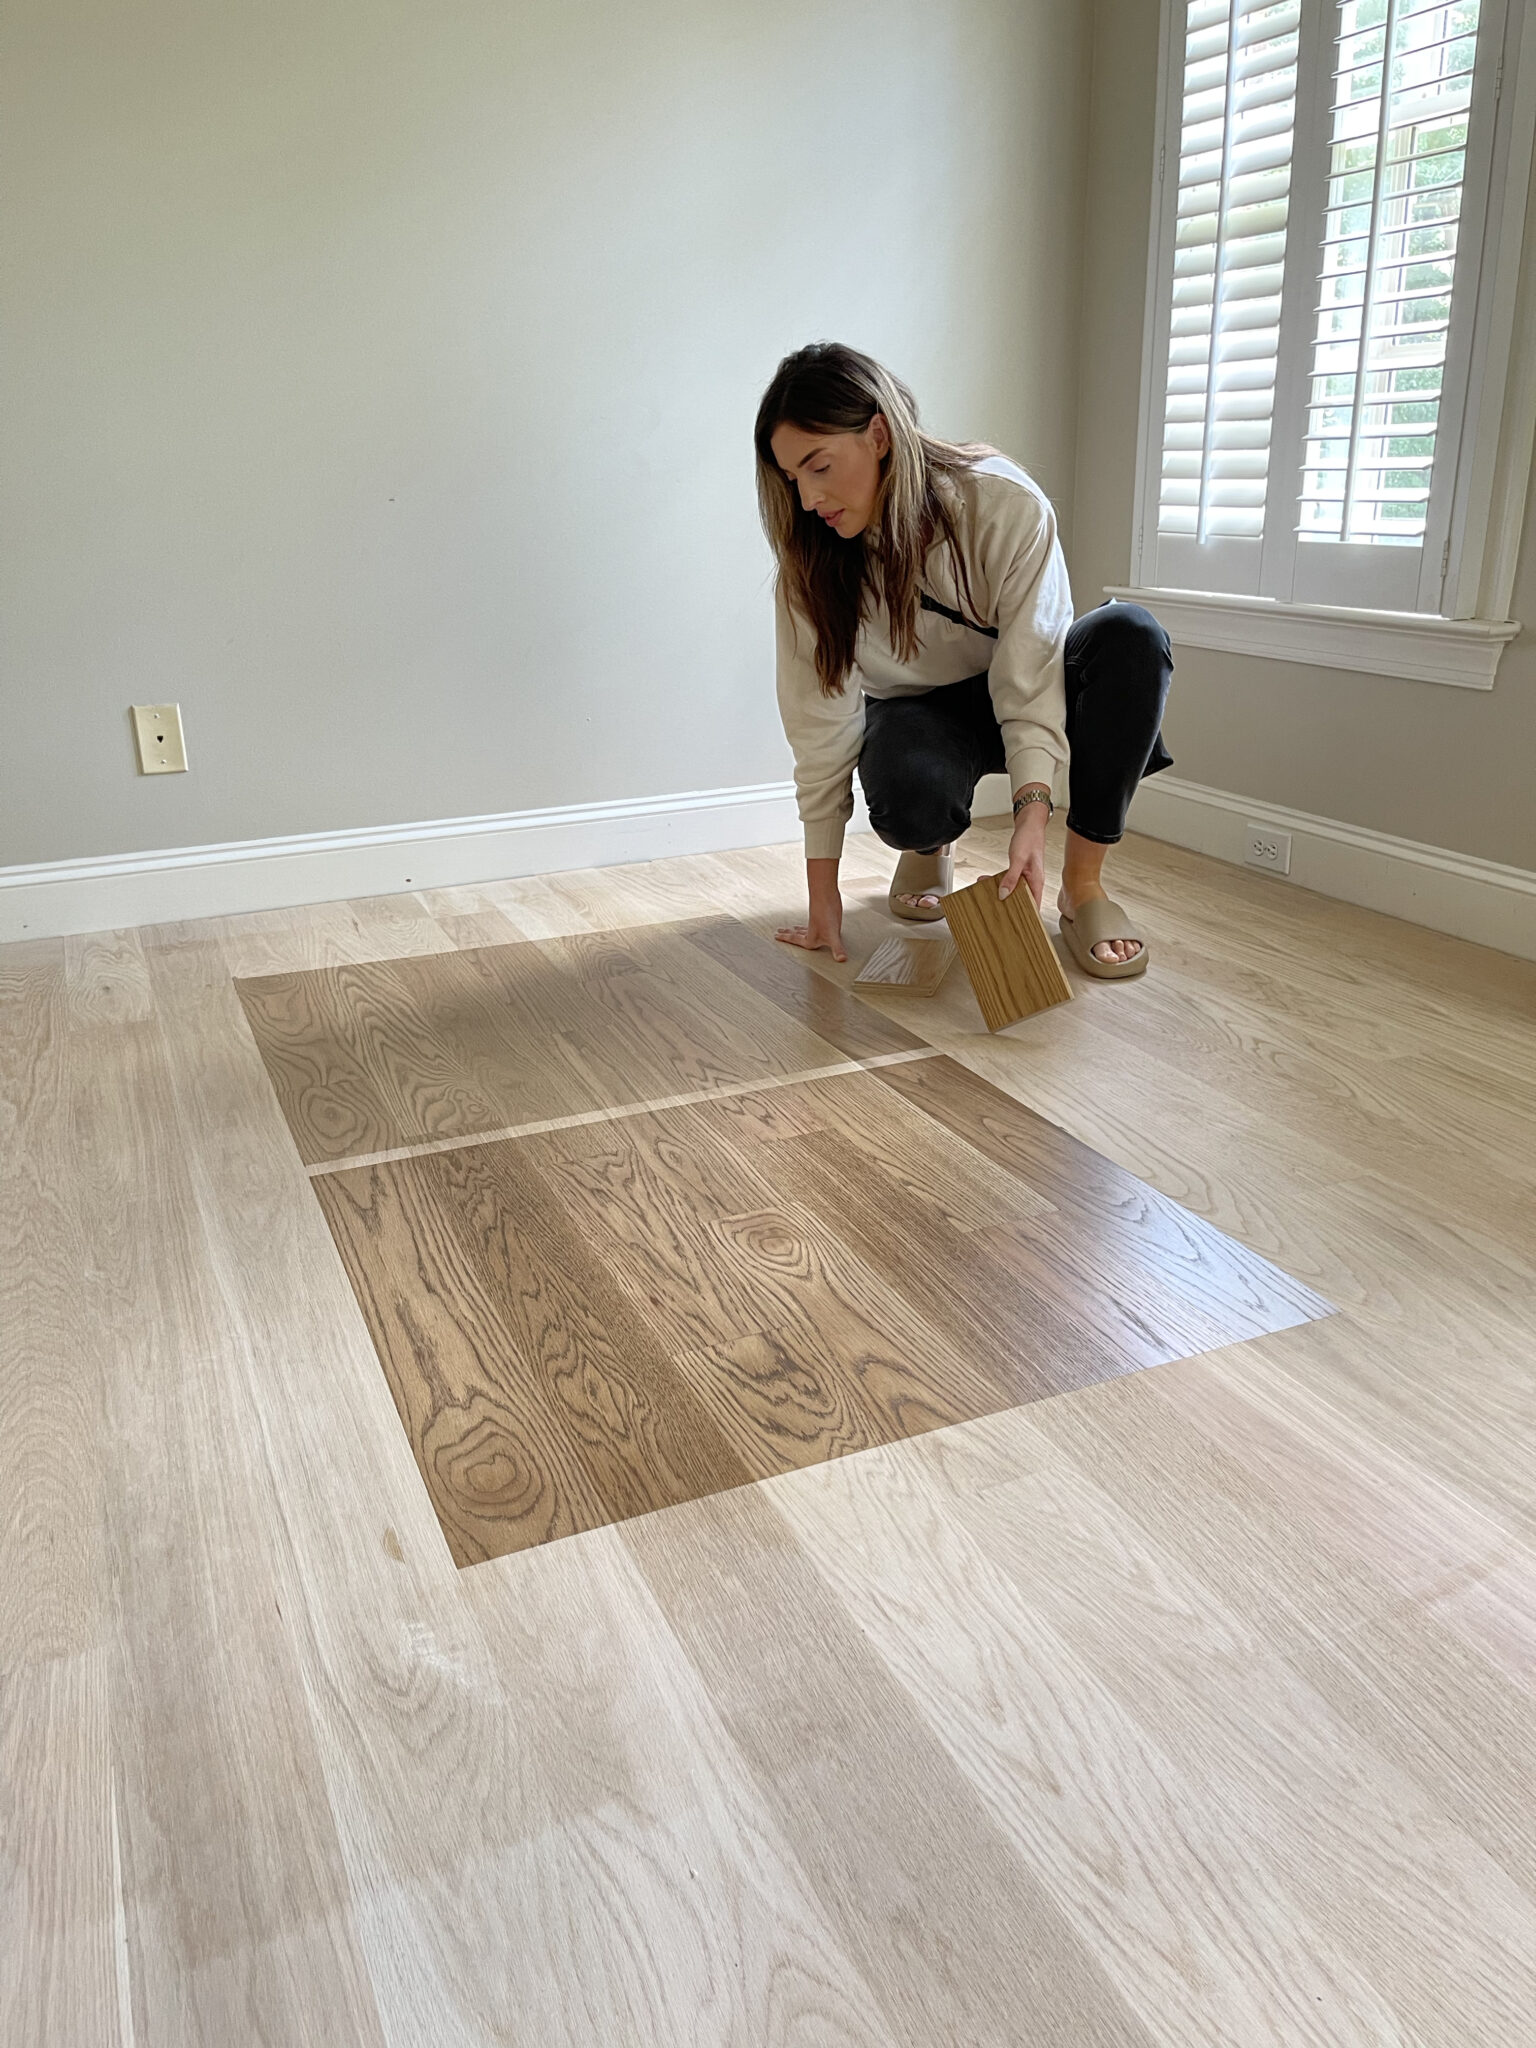 Transform your Red Oak Floors with Weathered Oak Stain!